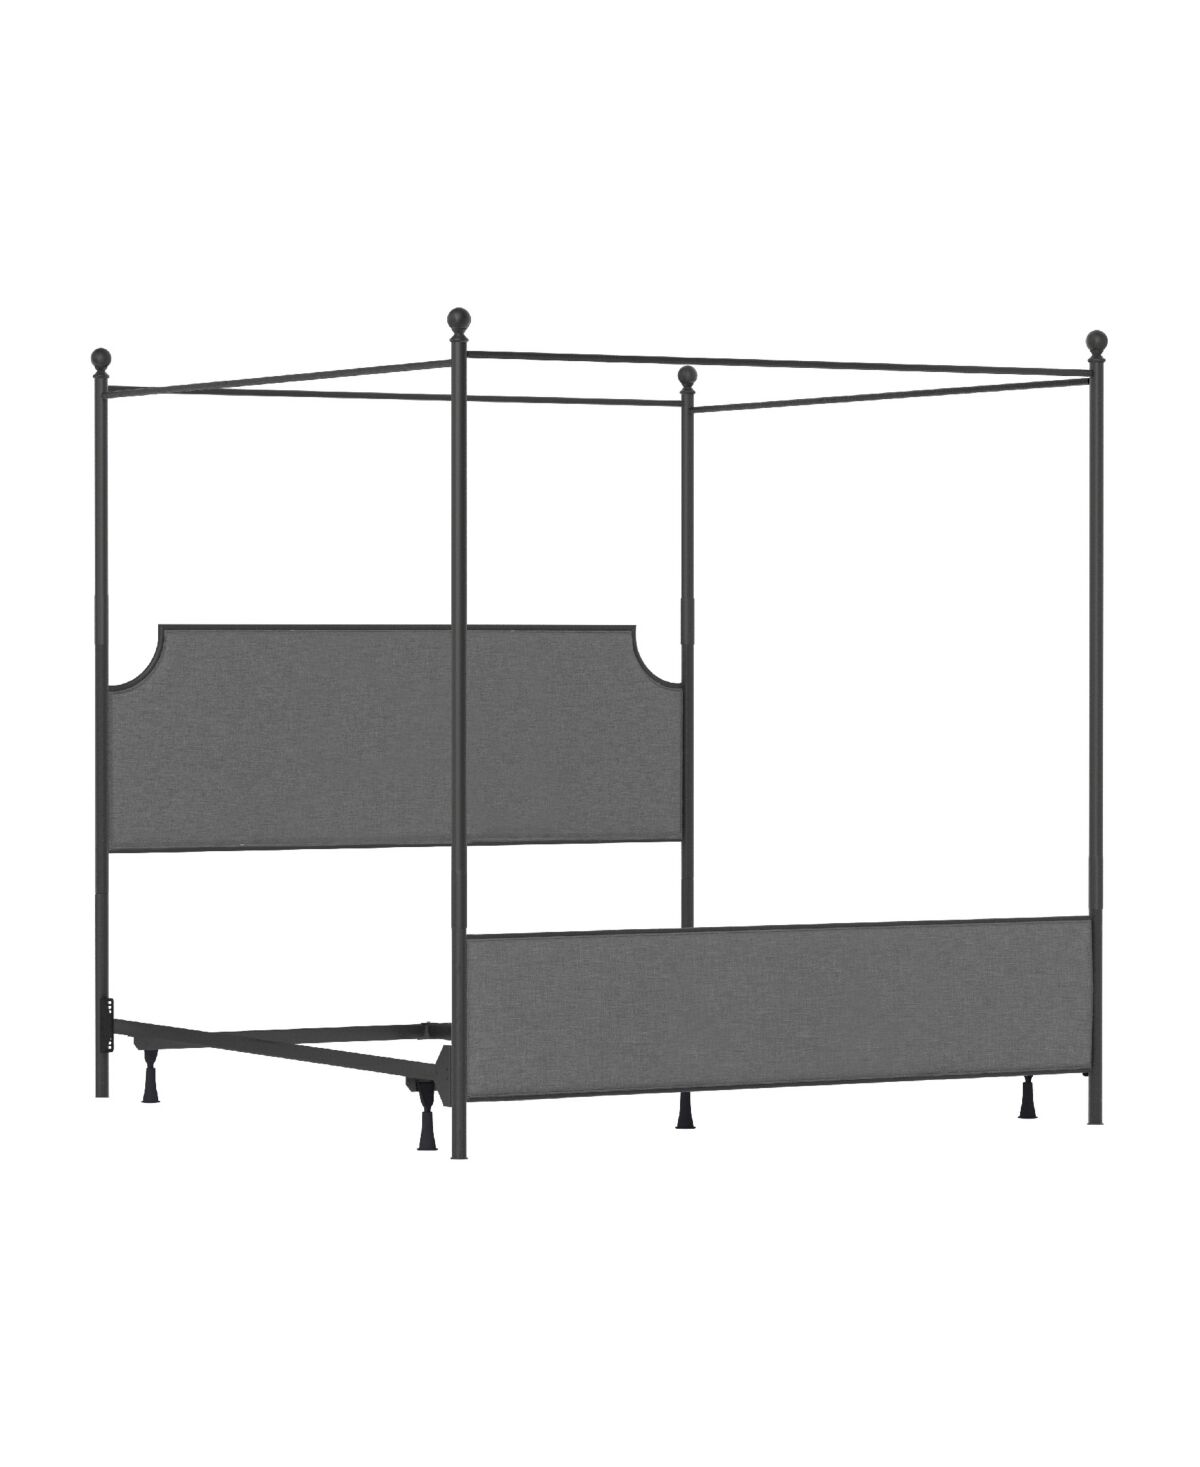 Hillsdale Mac Arthur and Upholstered Canopy Bed, King - Matte Black, Gray